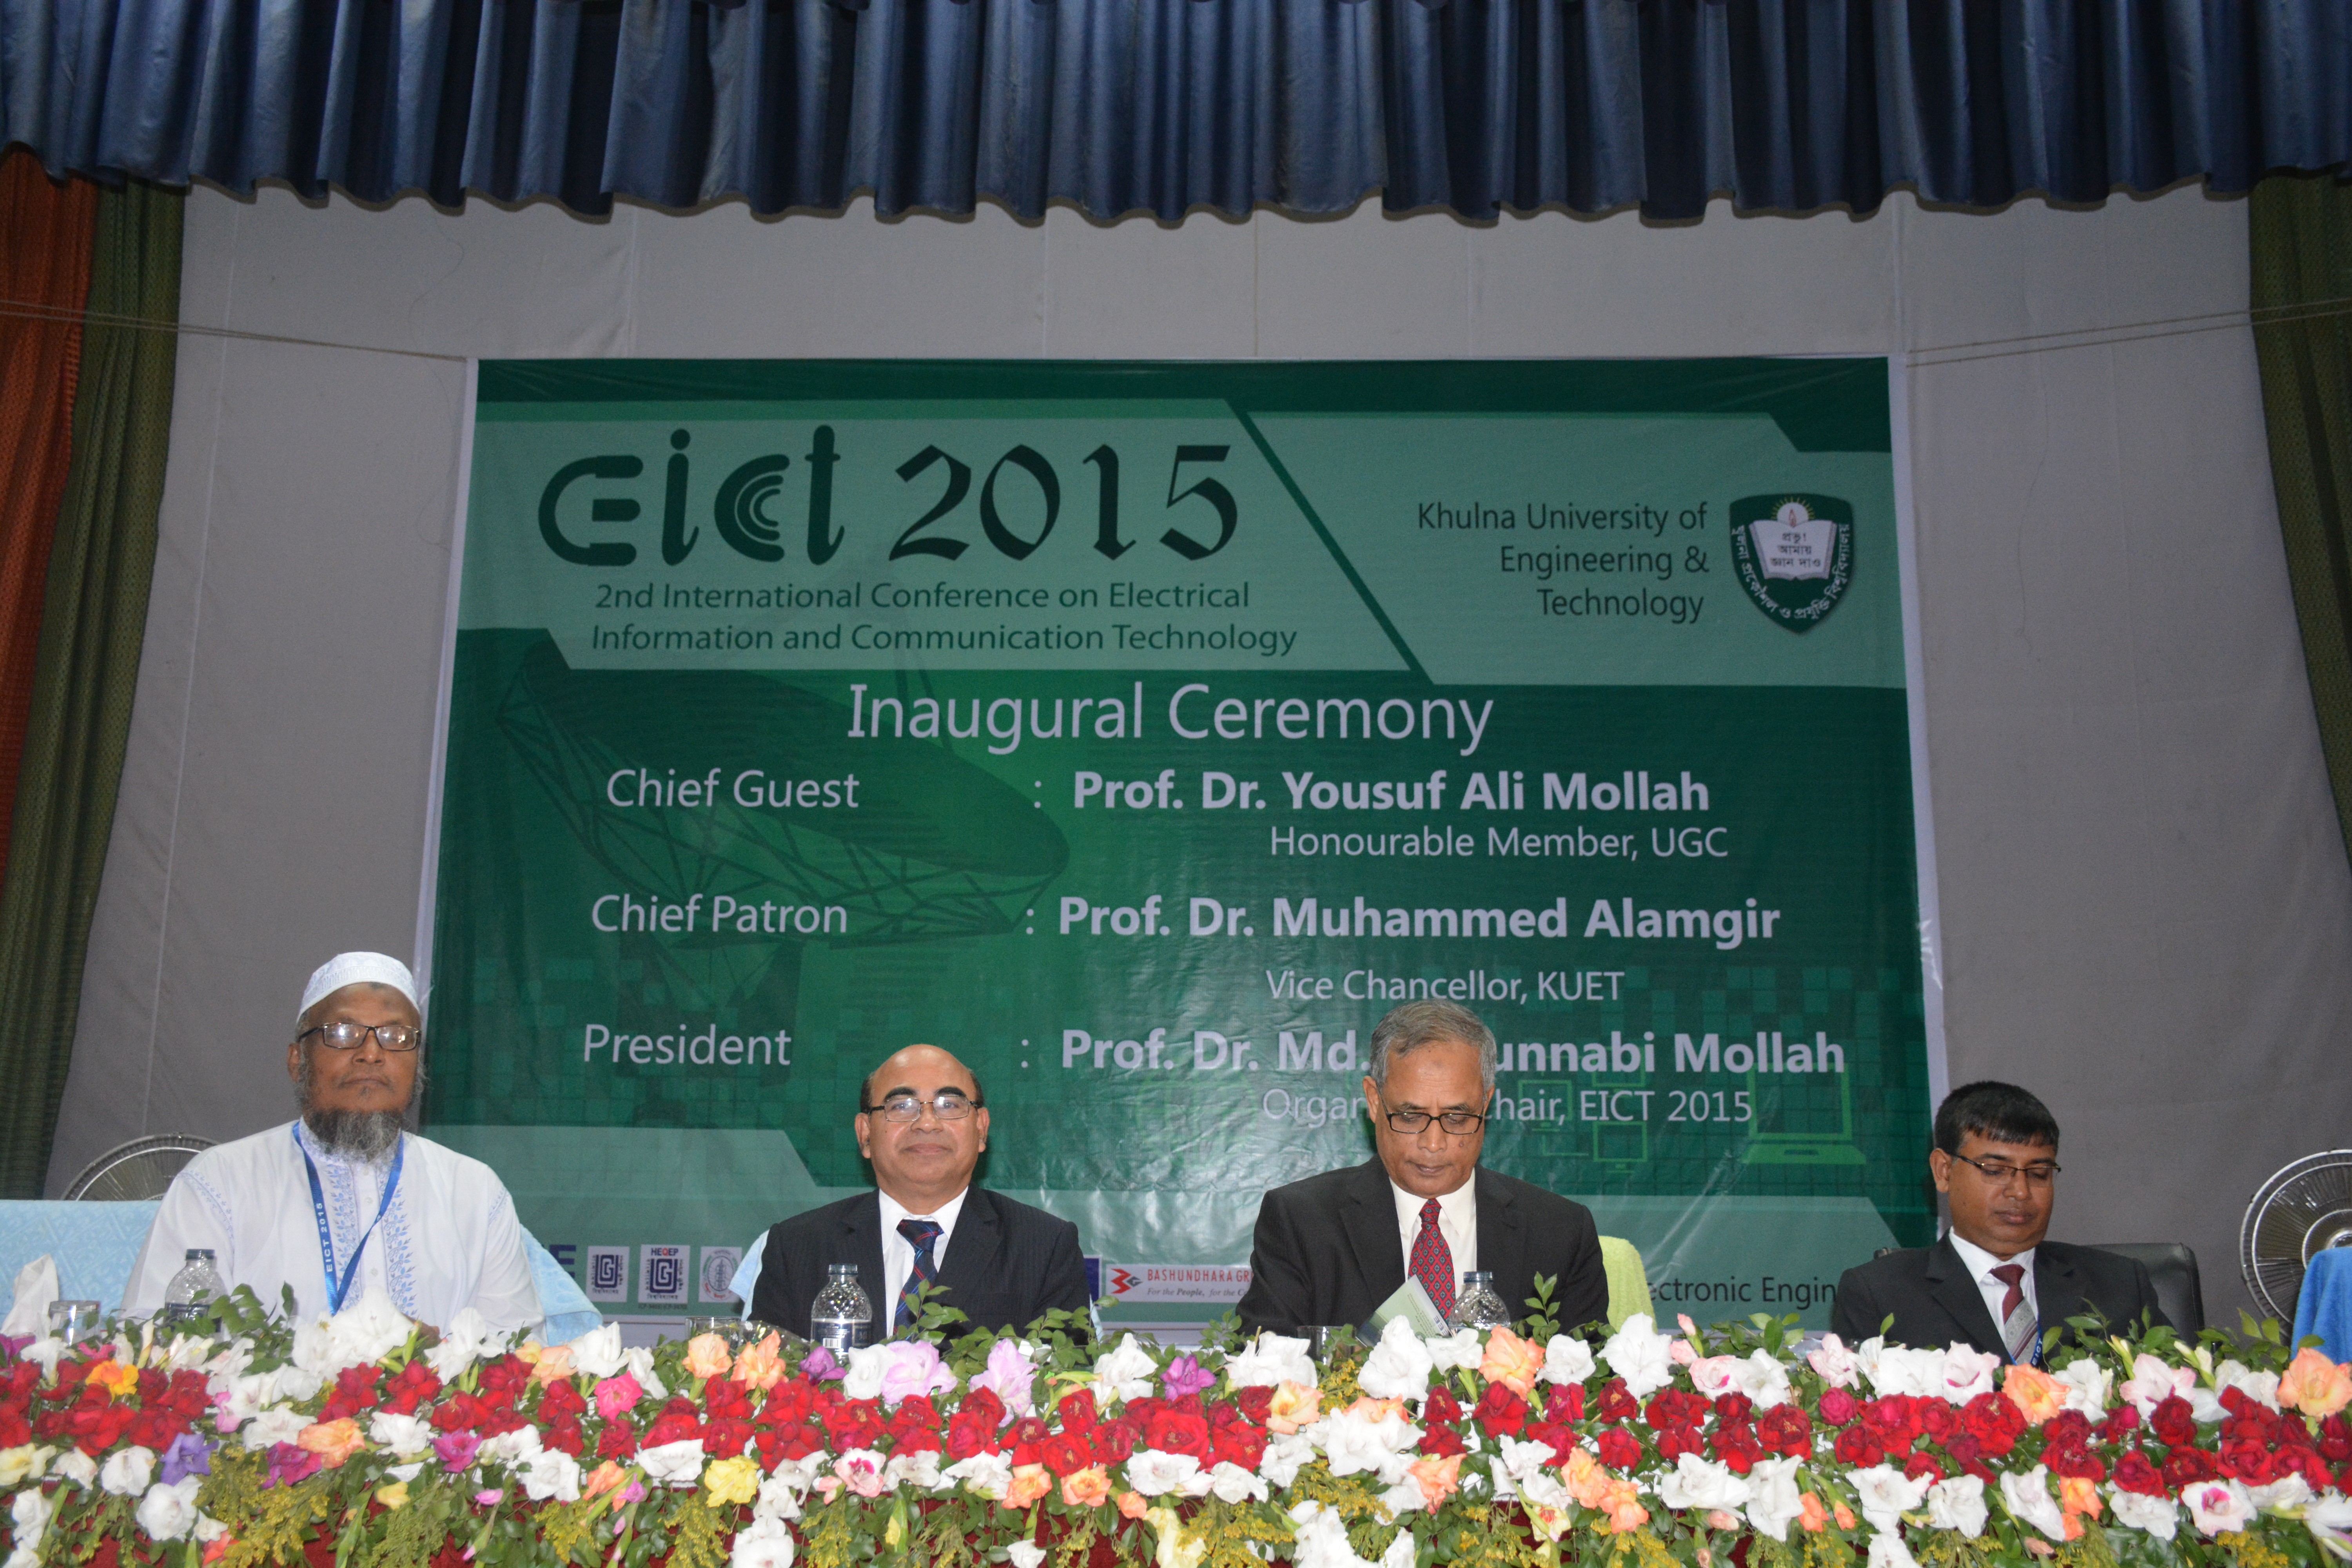 EICT 2015 Inaugural Ceremony